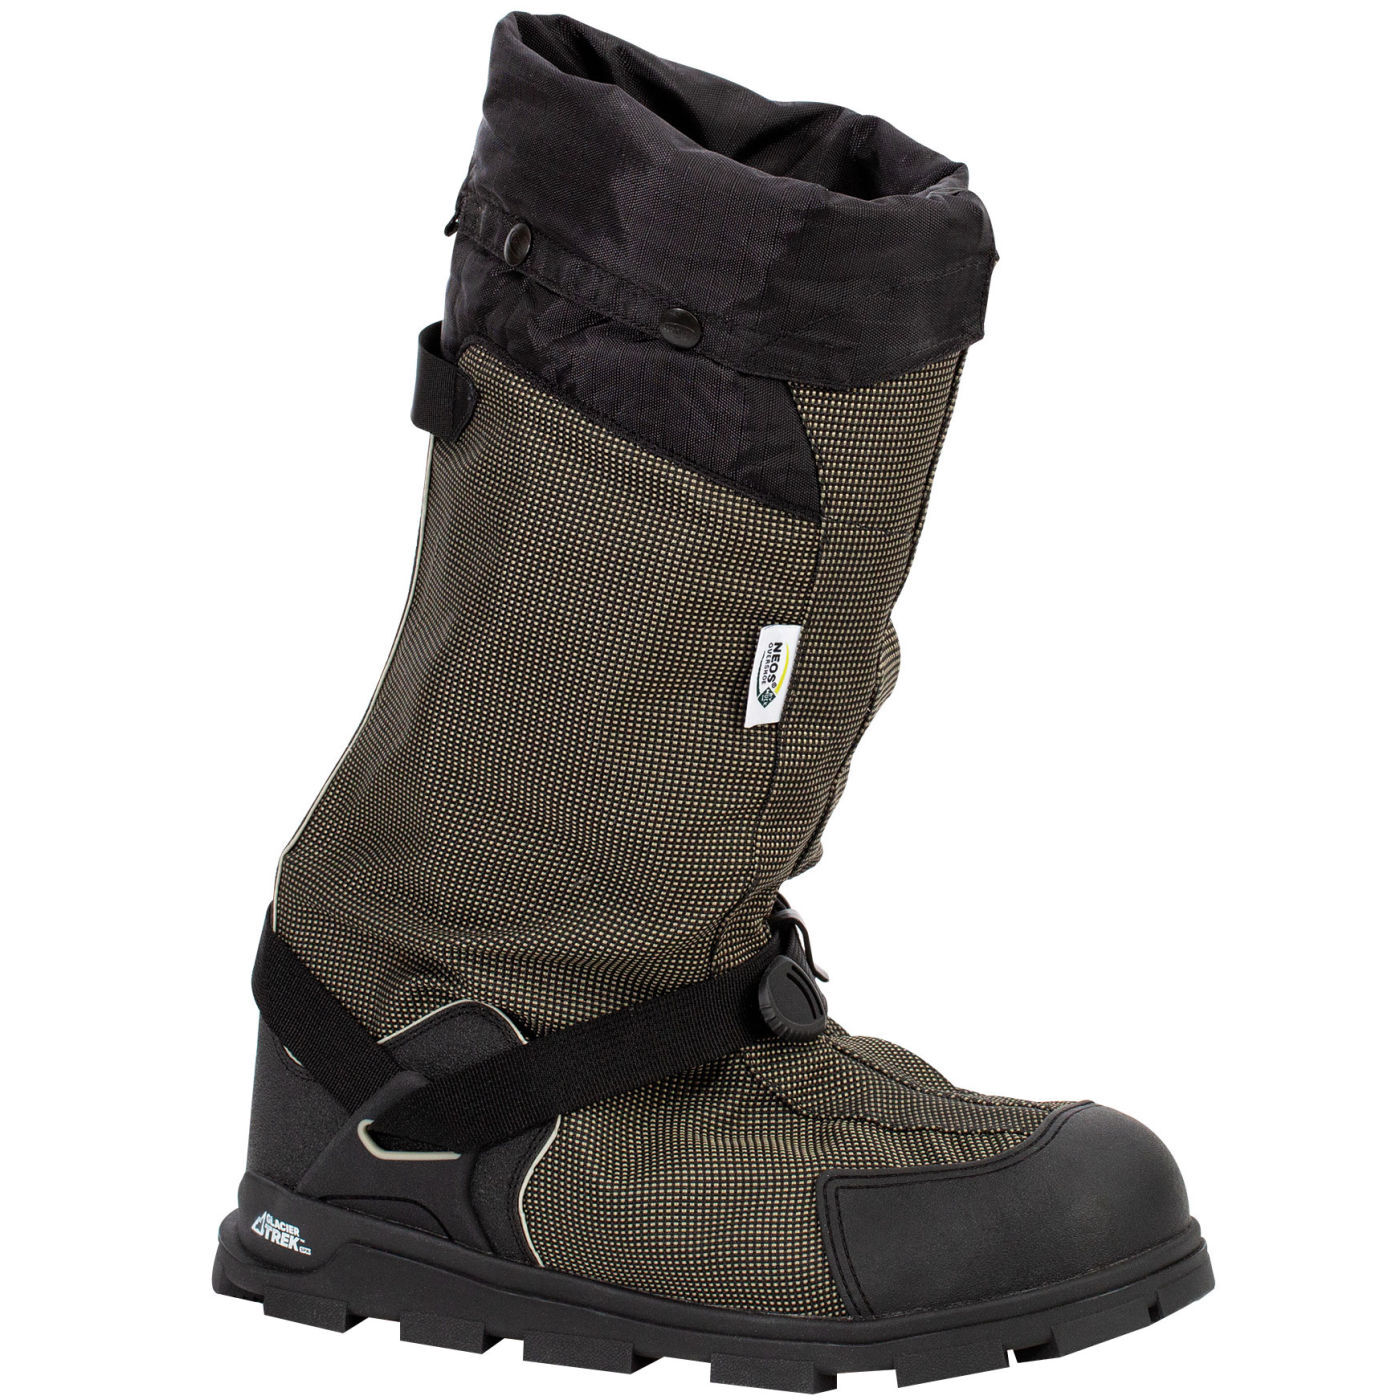 NEOS Navigator Glacier Trek SPK Insulated Overshoe + Cleats from GME Supply